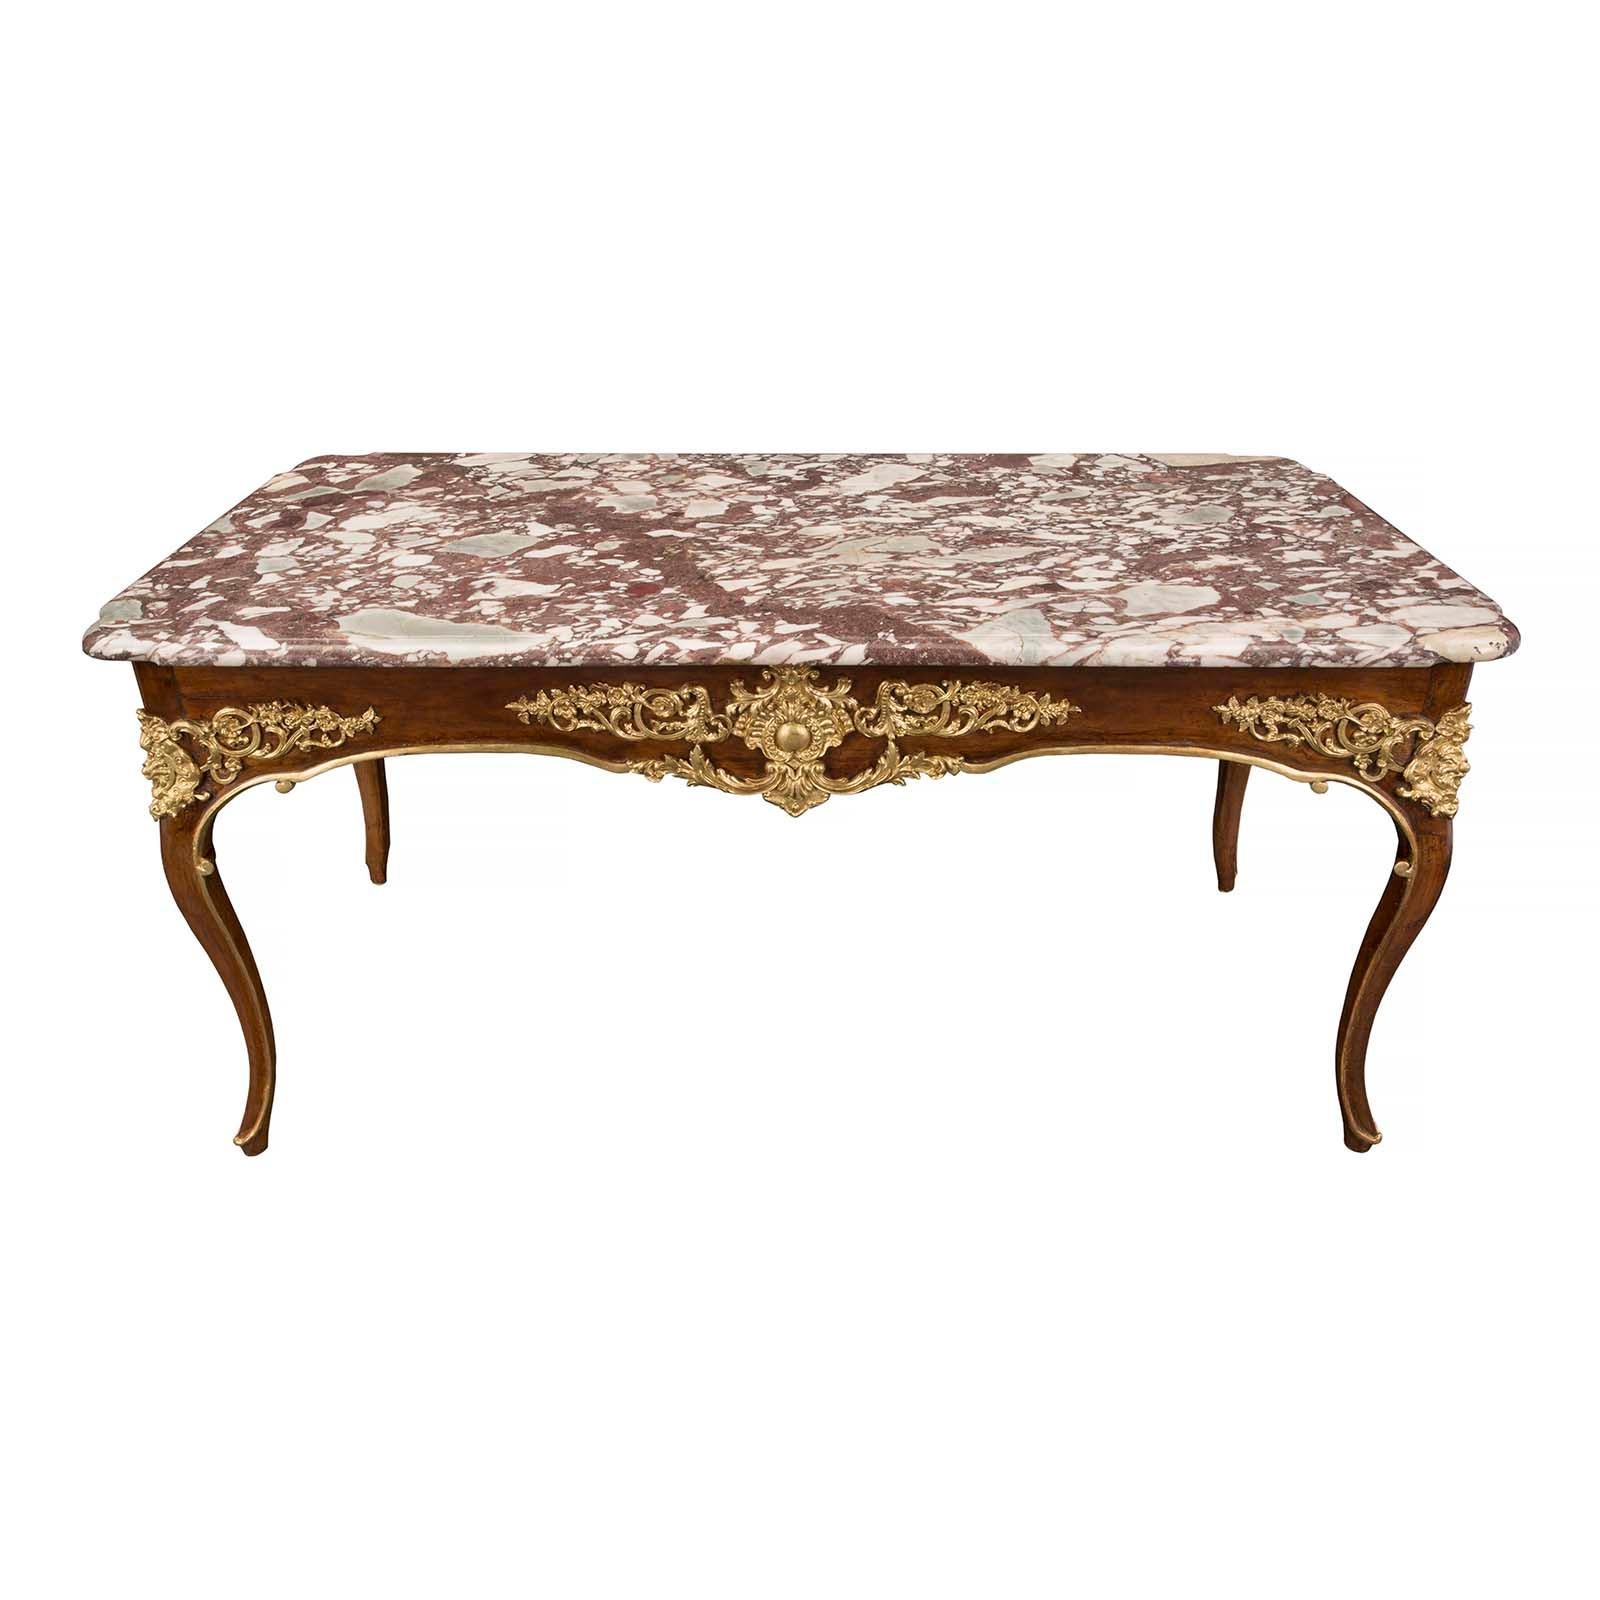 An impressive Continental 18th Century Louis XV period walnut, giltwood and marble rectangular center table. The table is raised by elegant cabriole legs with a fine giltwood filet which extends along the border of each leg and across the arbalest